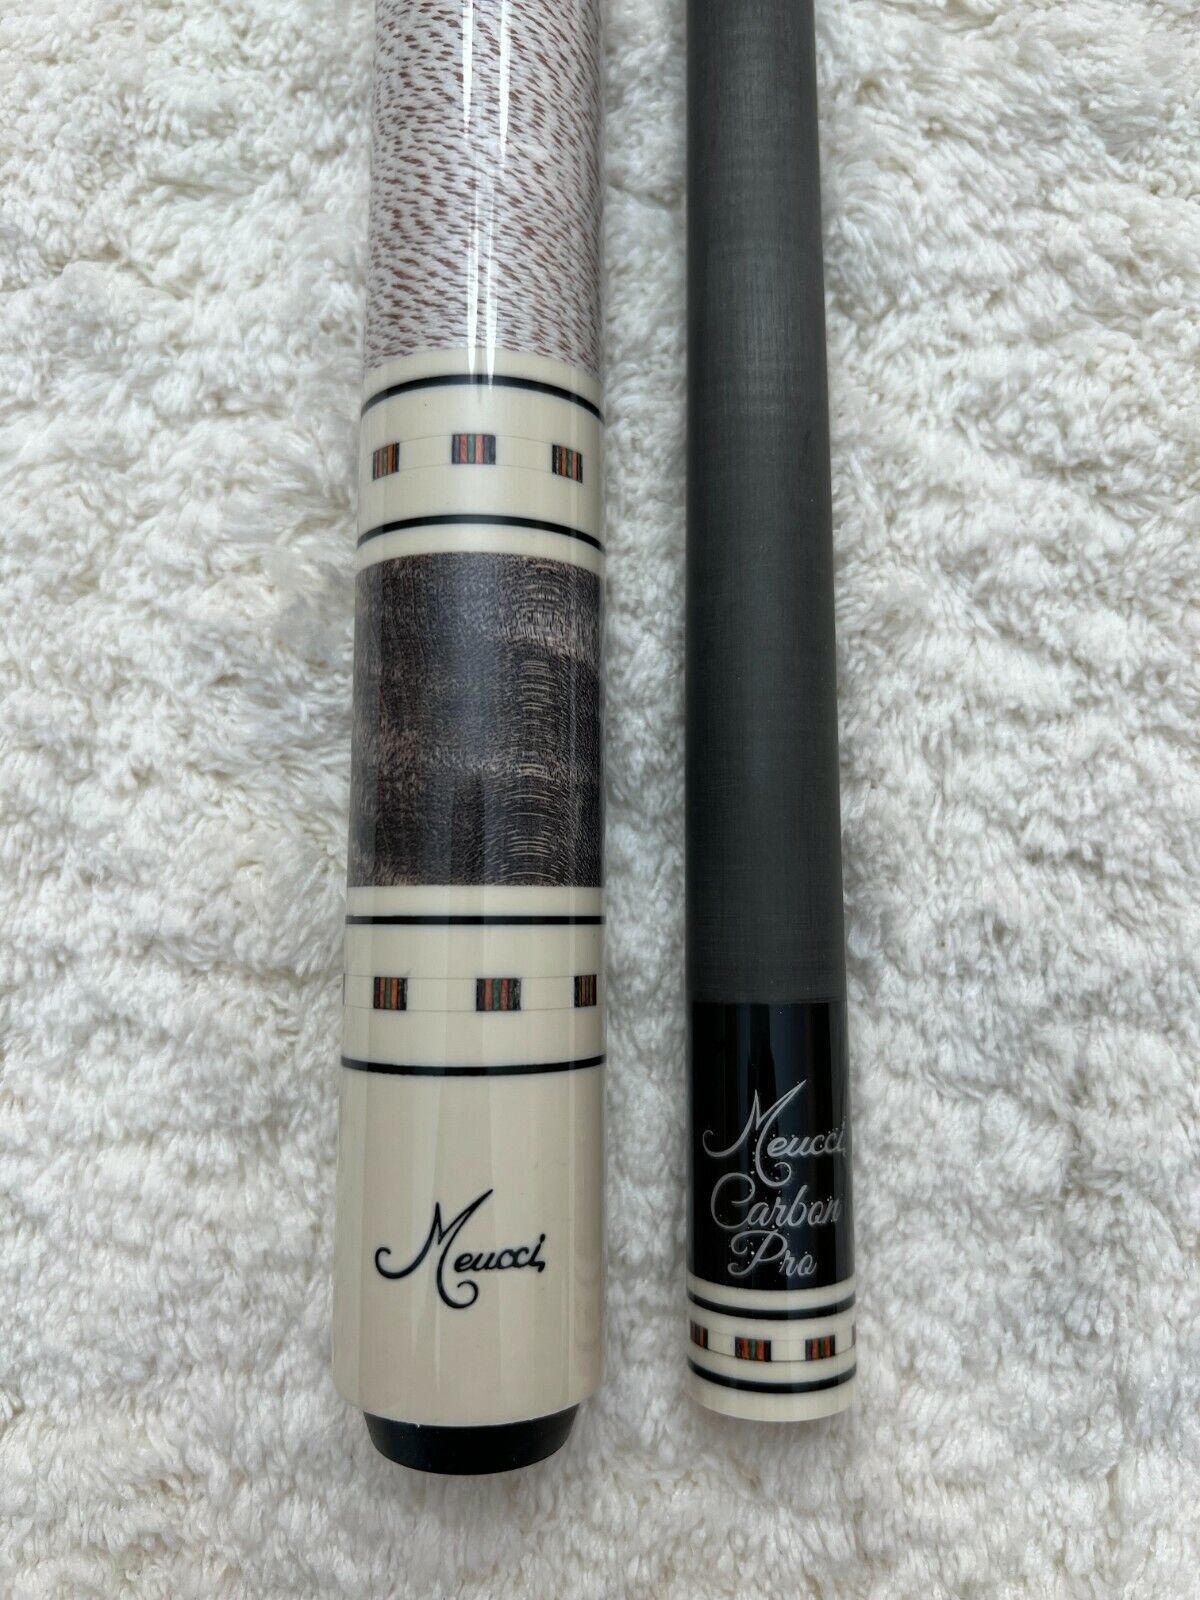 IN STOCK, Meucci Cue 97-12 Pool Cue w/ Carbon Pro Shaft, FREE HARD CASE,  9712